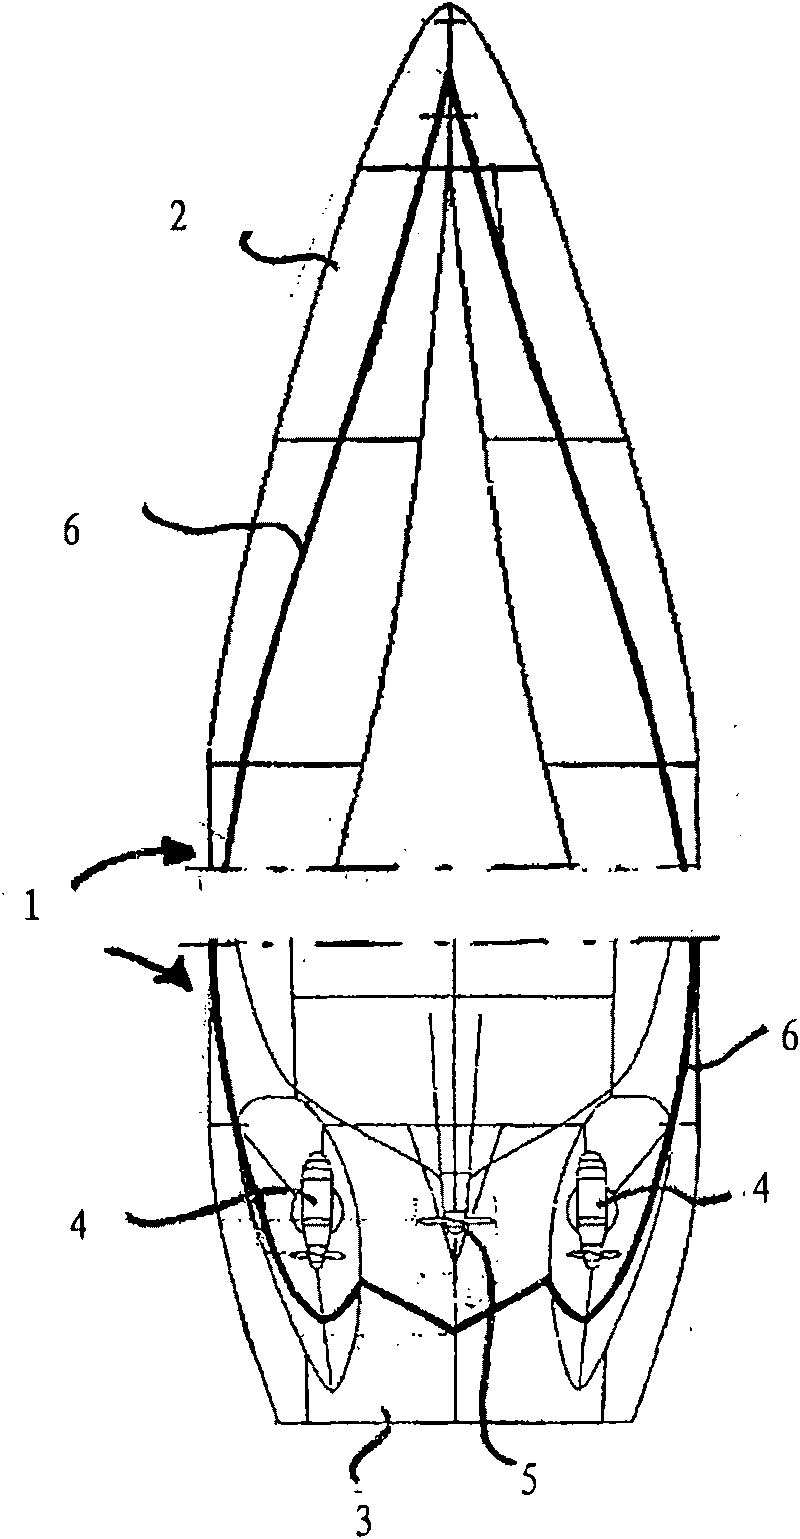 Method for improving the ice-breaking properties of a water craft and a water craft constructed according to the method